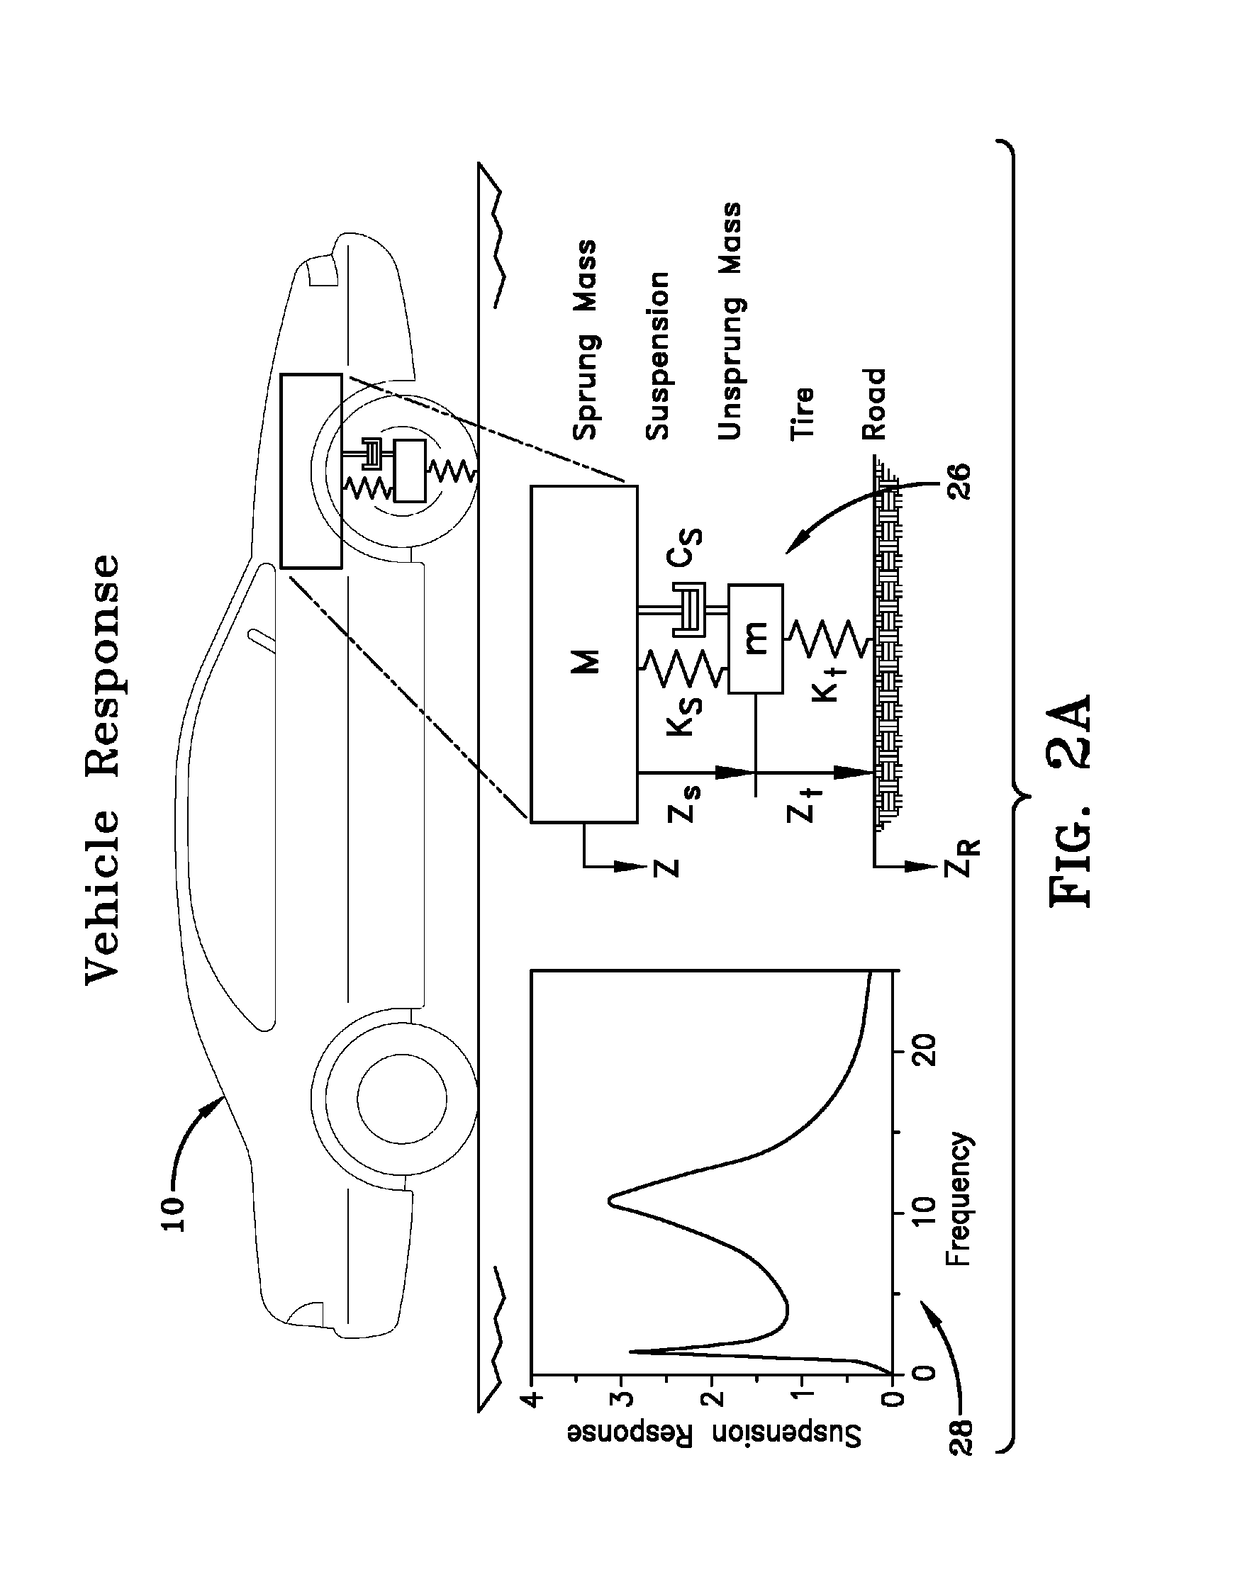 Tire sensor-based robust road surface roughness classification system and method